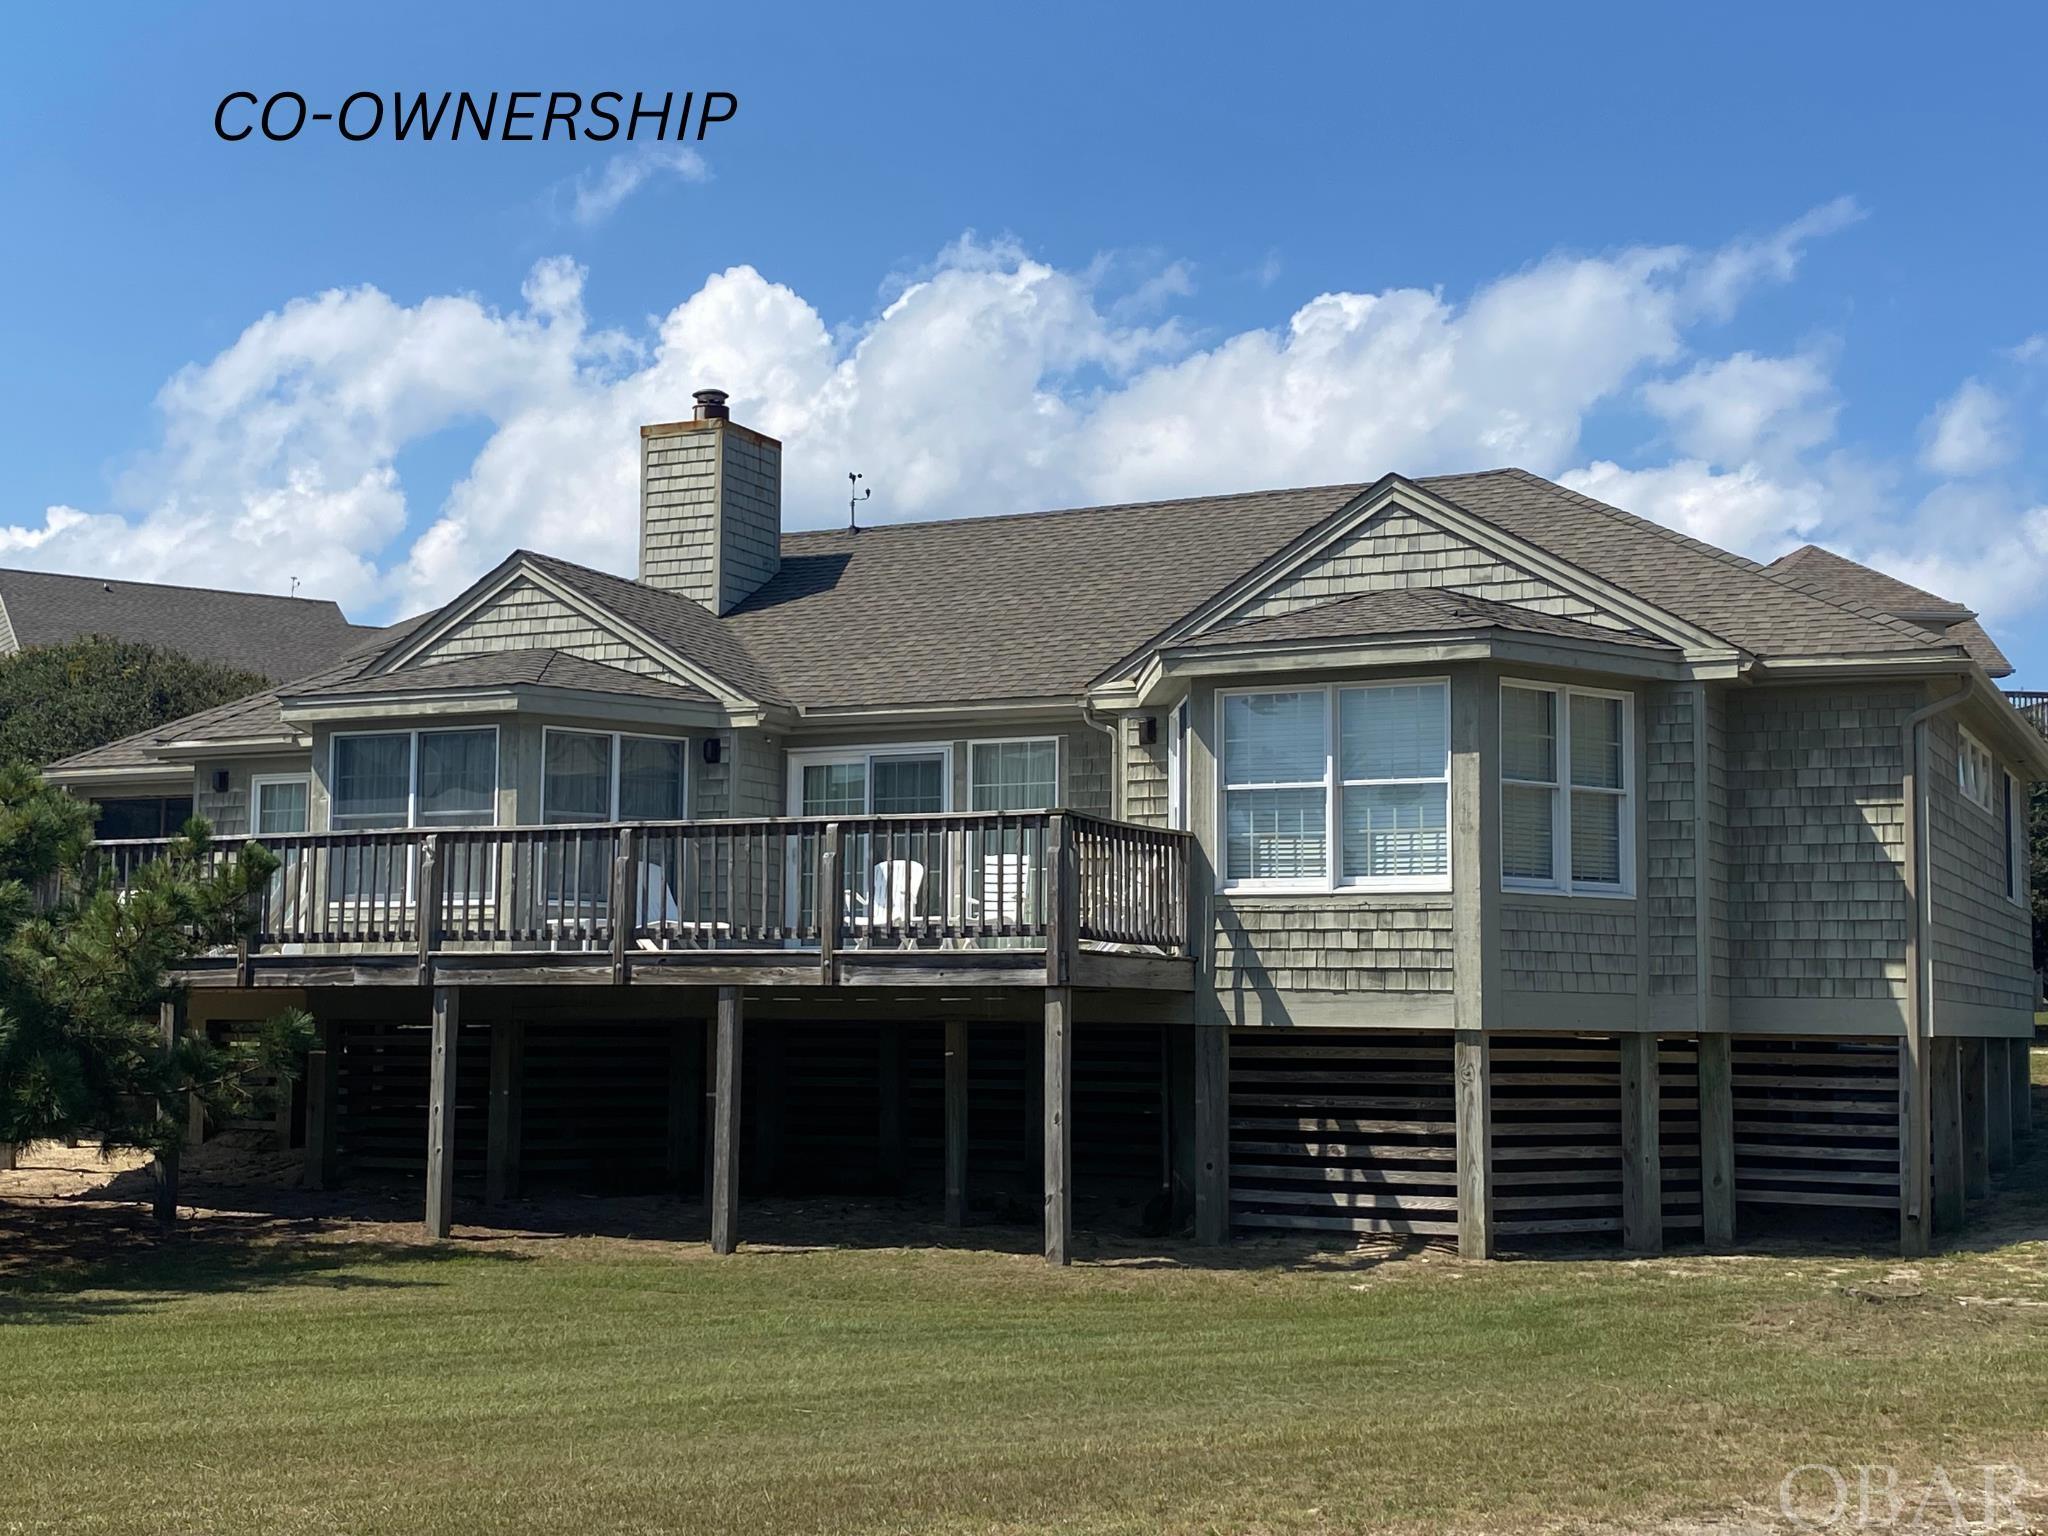 131 Ships Watch Drive, Duck, NC 27949, 4 Bedrooms Bedrooms, ,3 BathroomsBathrooms,Residential,For Sale,Ships Watch Drive,123031